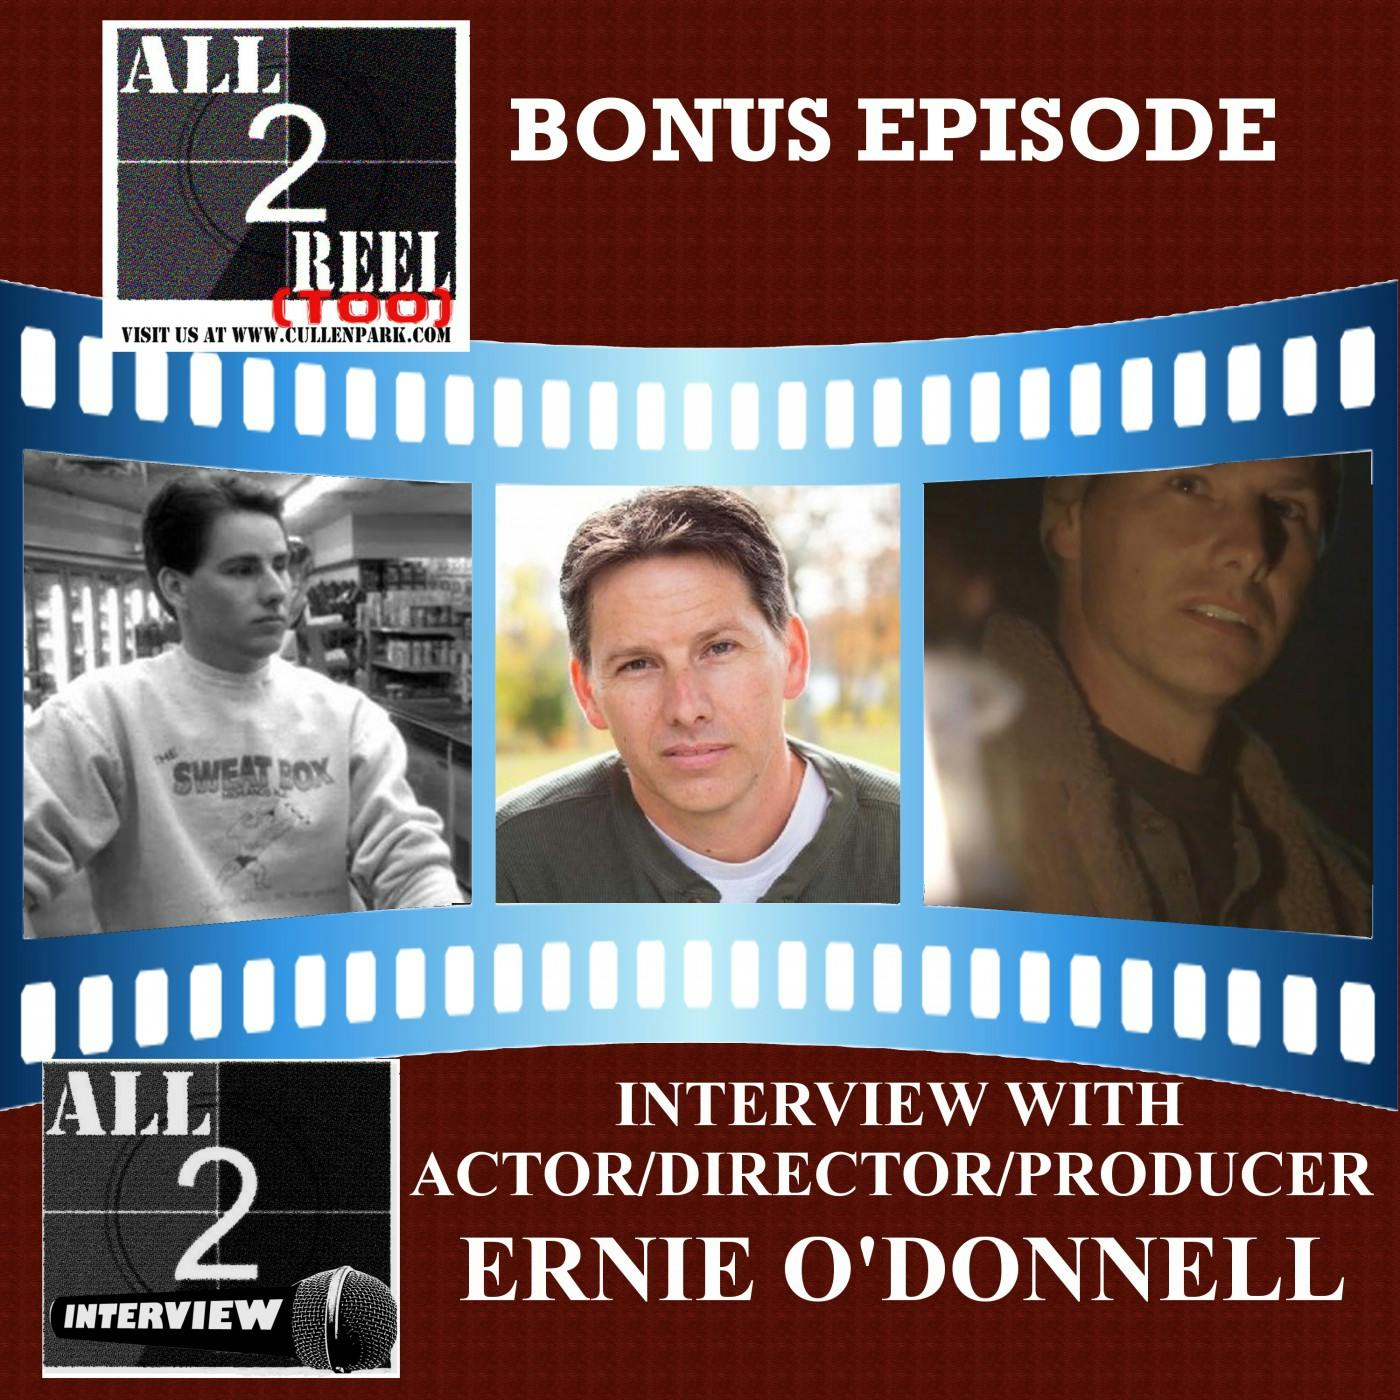 ERNIE O'DONNELL INTERVIEW